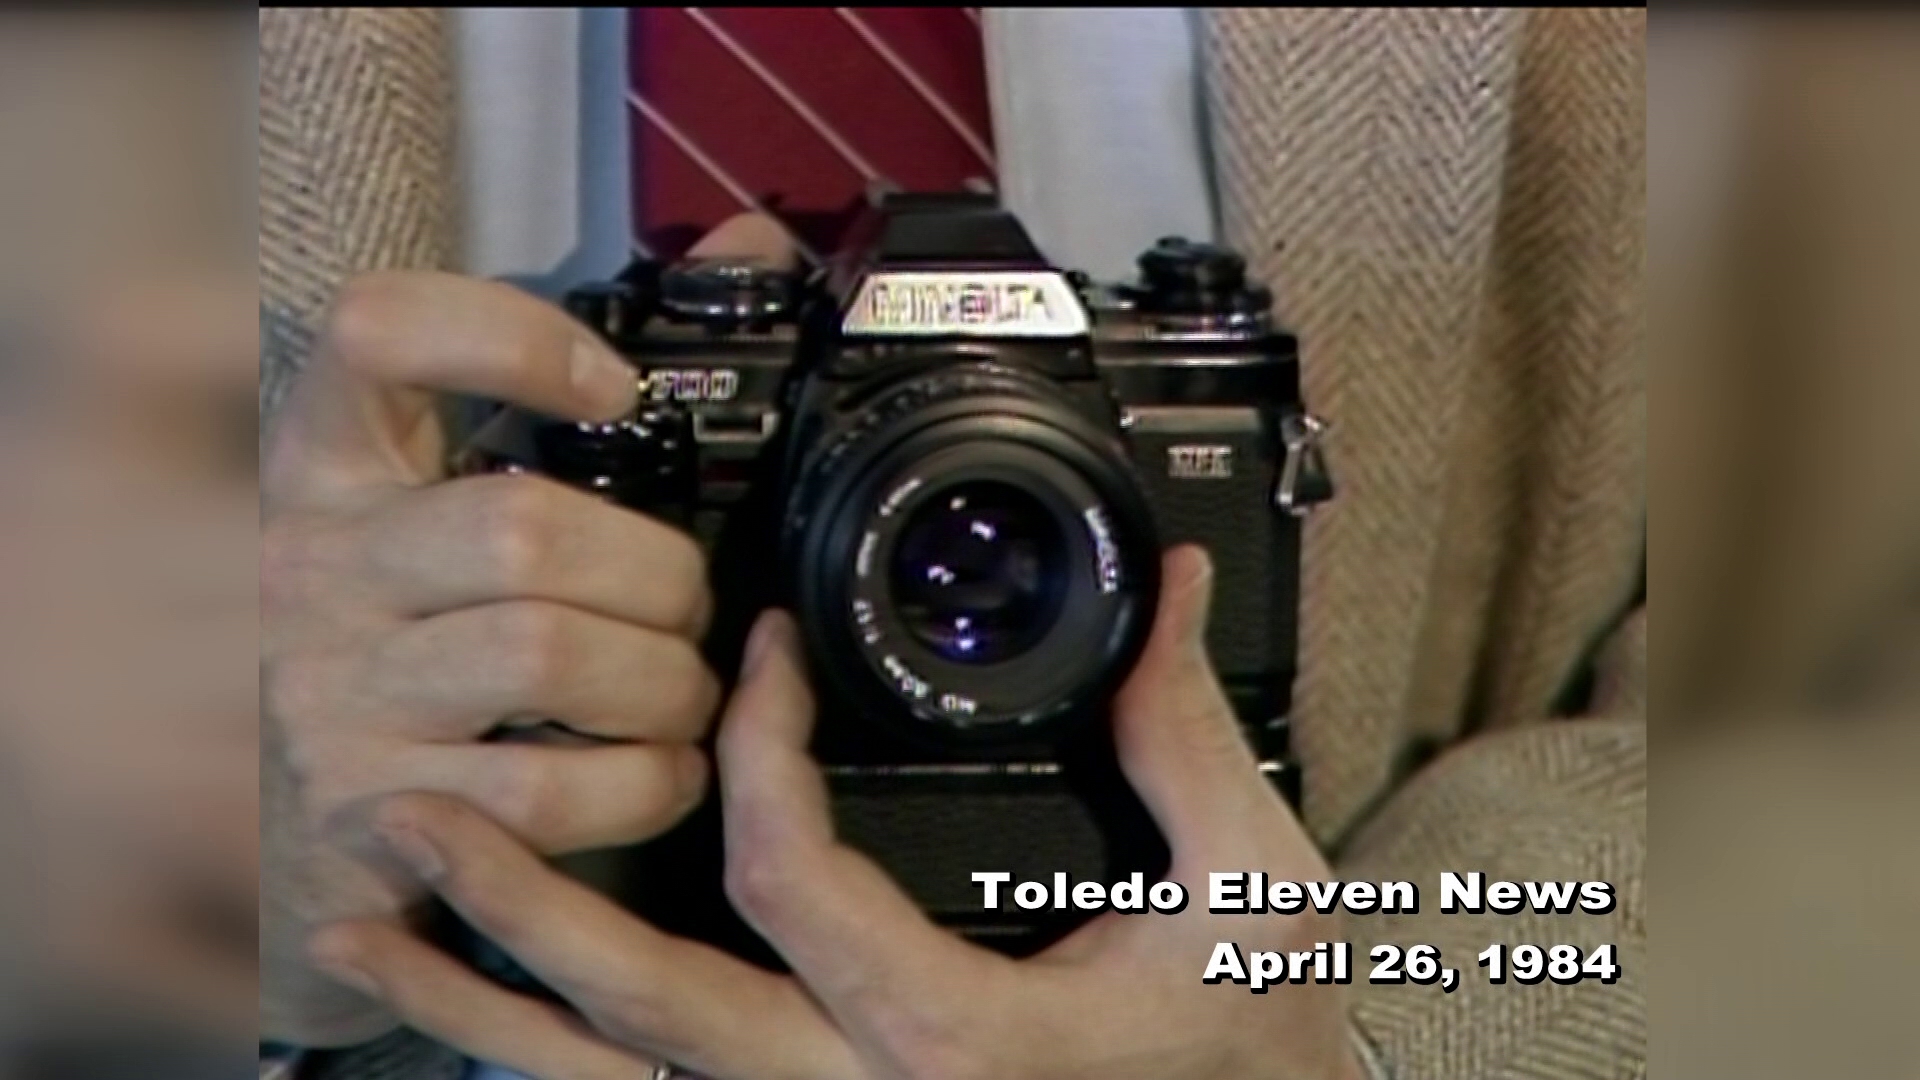 In the spring of 1984, taking a great snapshot usually started with a trip to the local camera store. Here's a look at what was the latest tools for photographers.